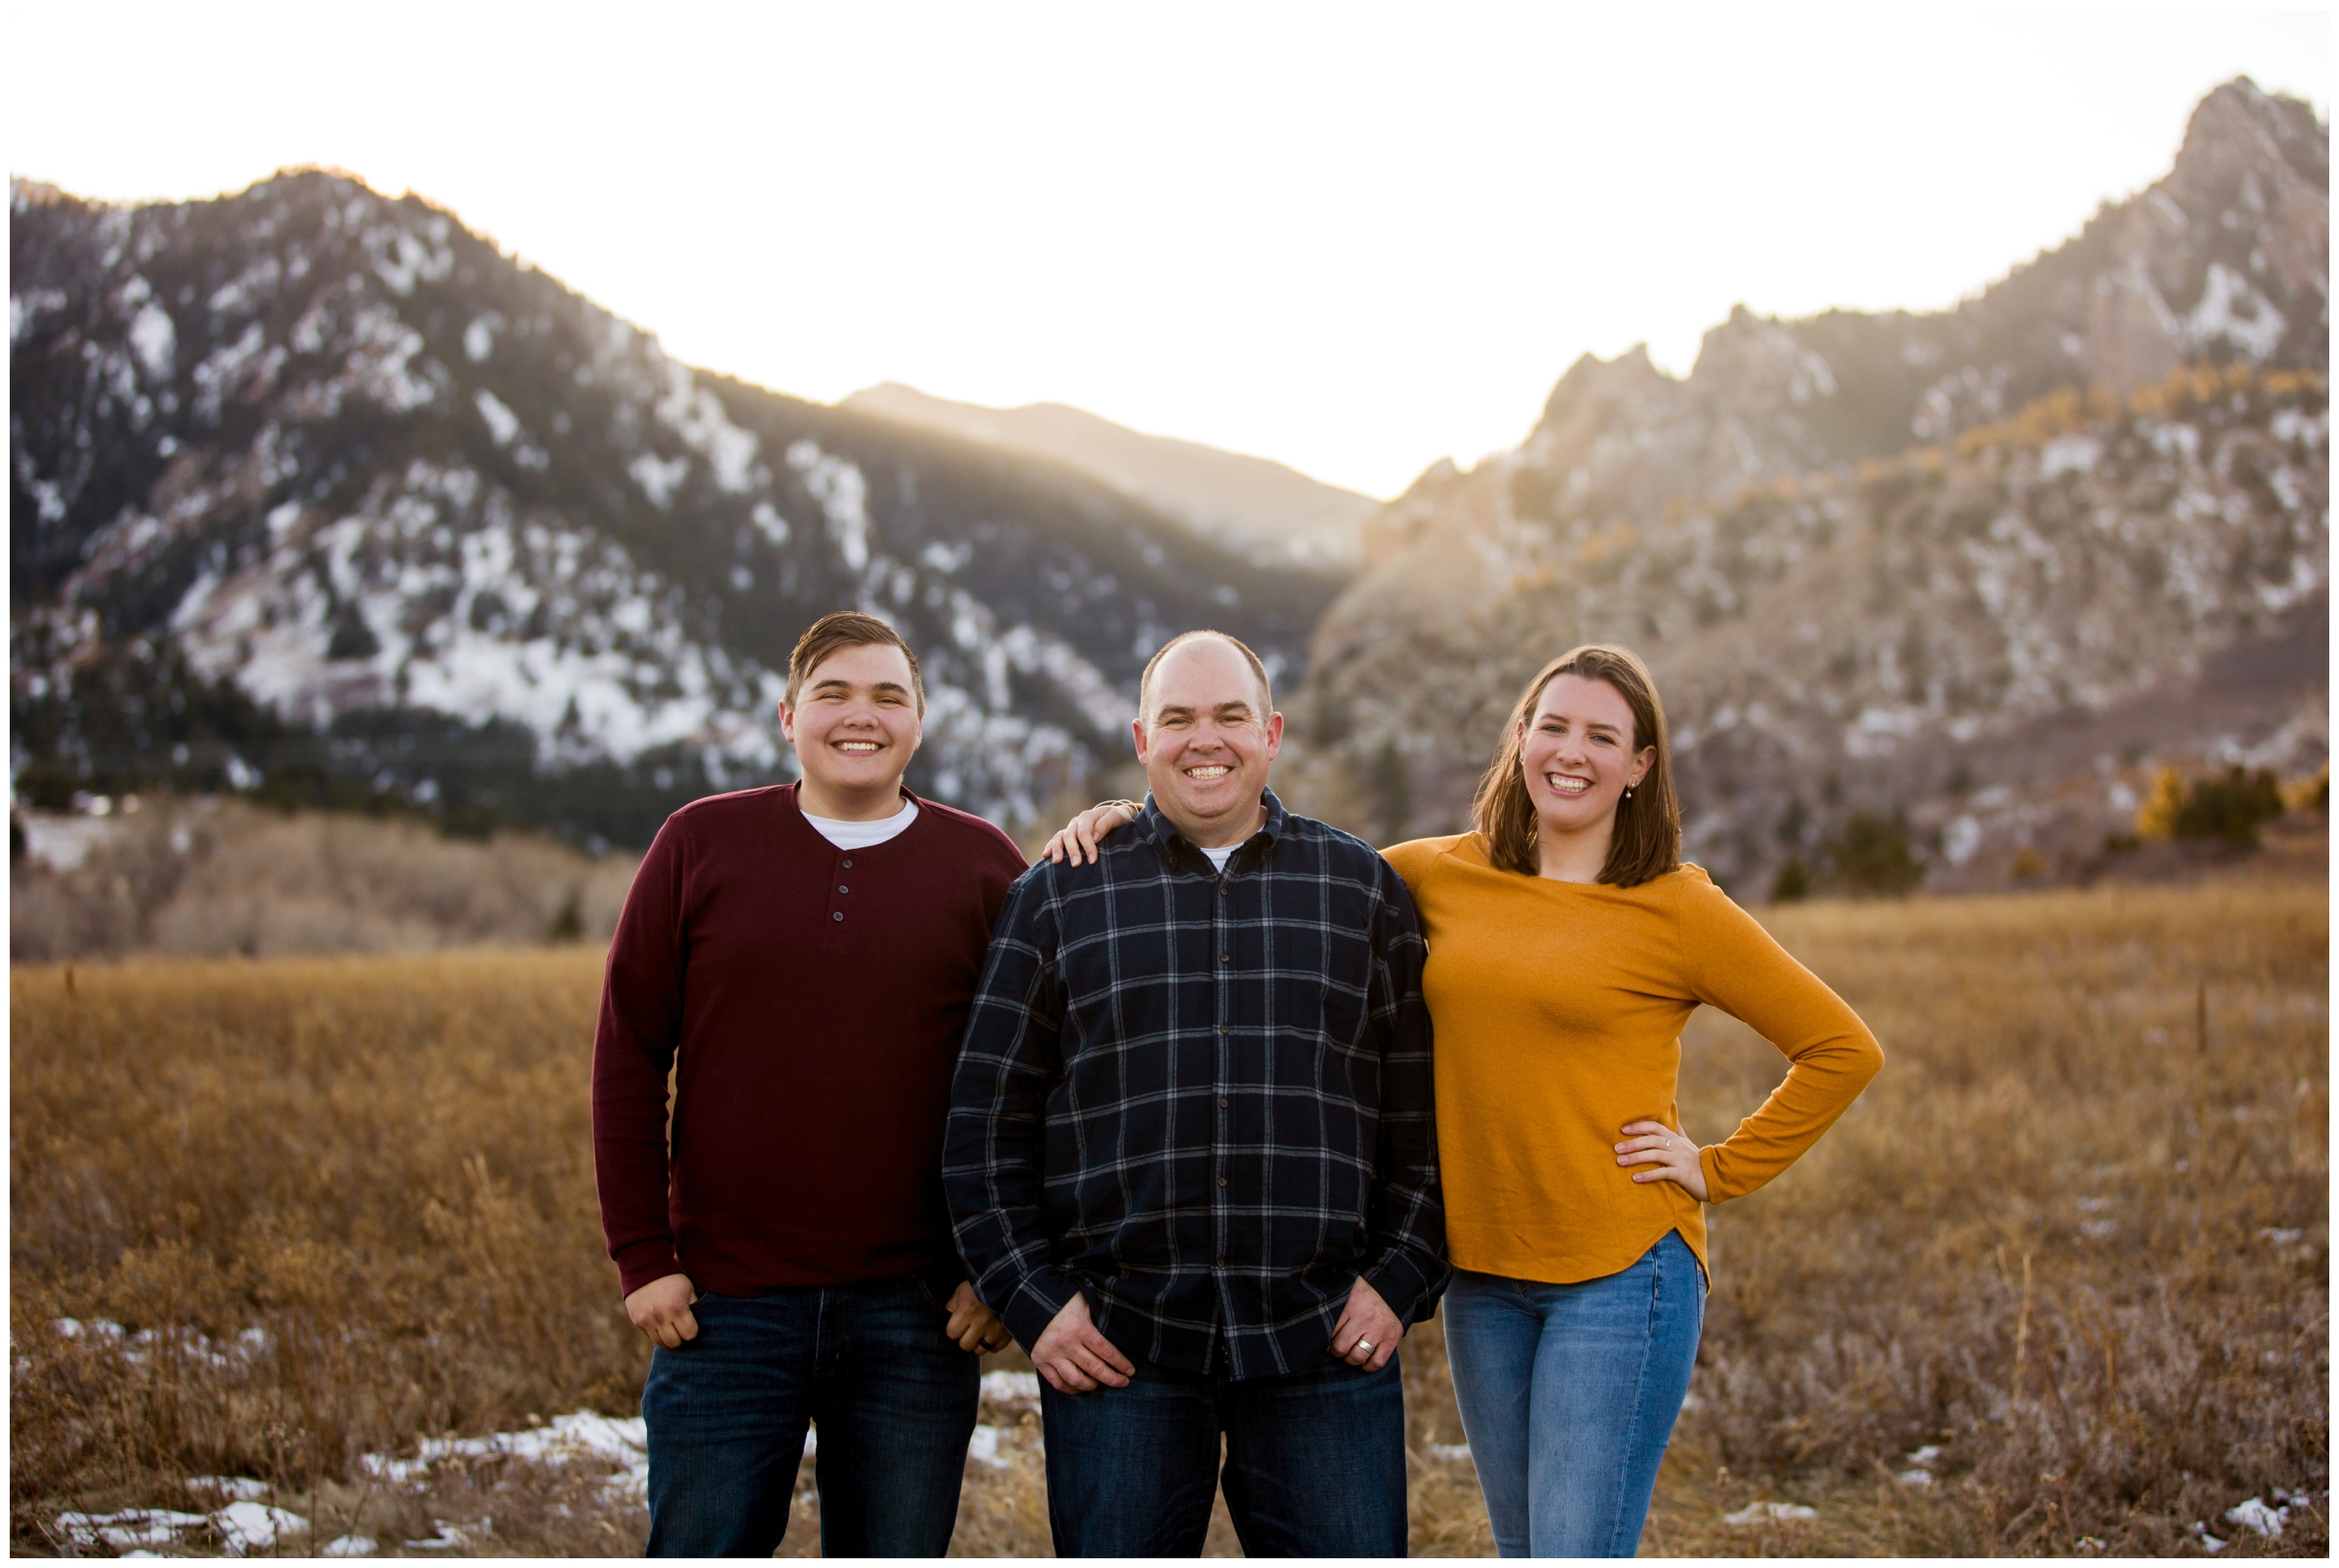 Boulder family photography inspiration at South Mesa Trail by Colorado portrait photographer Plum Pretty Photography